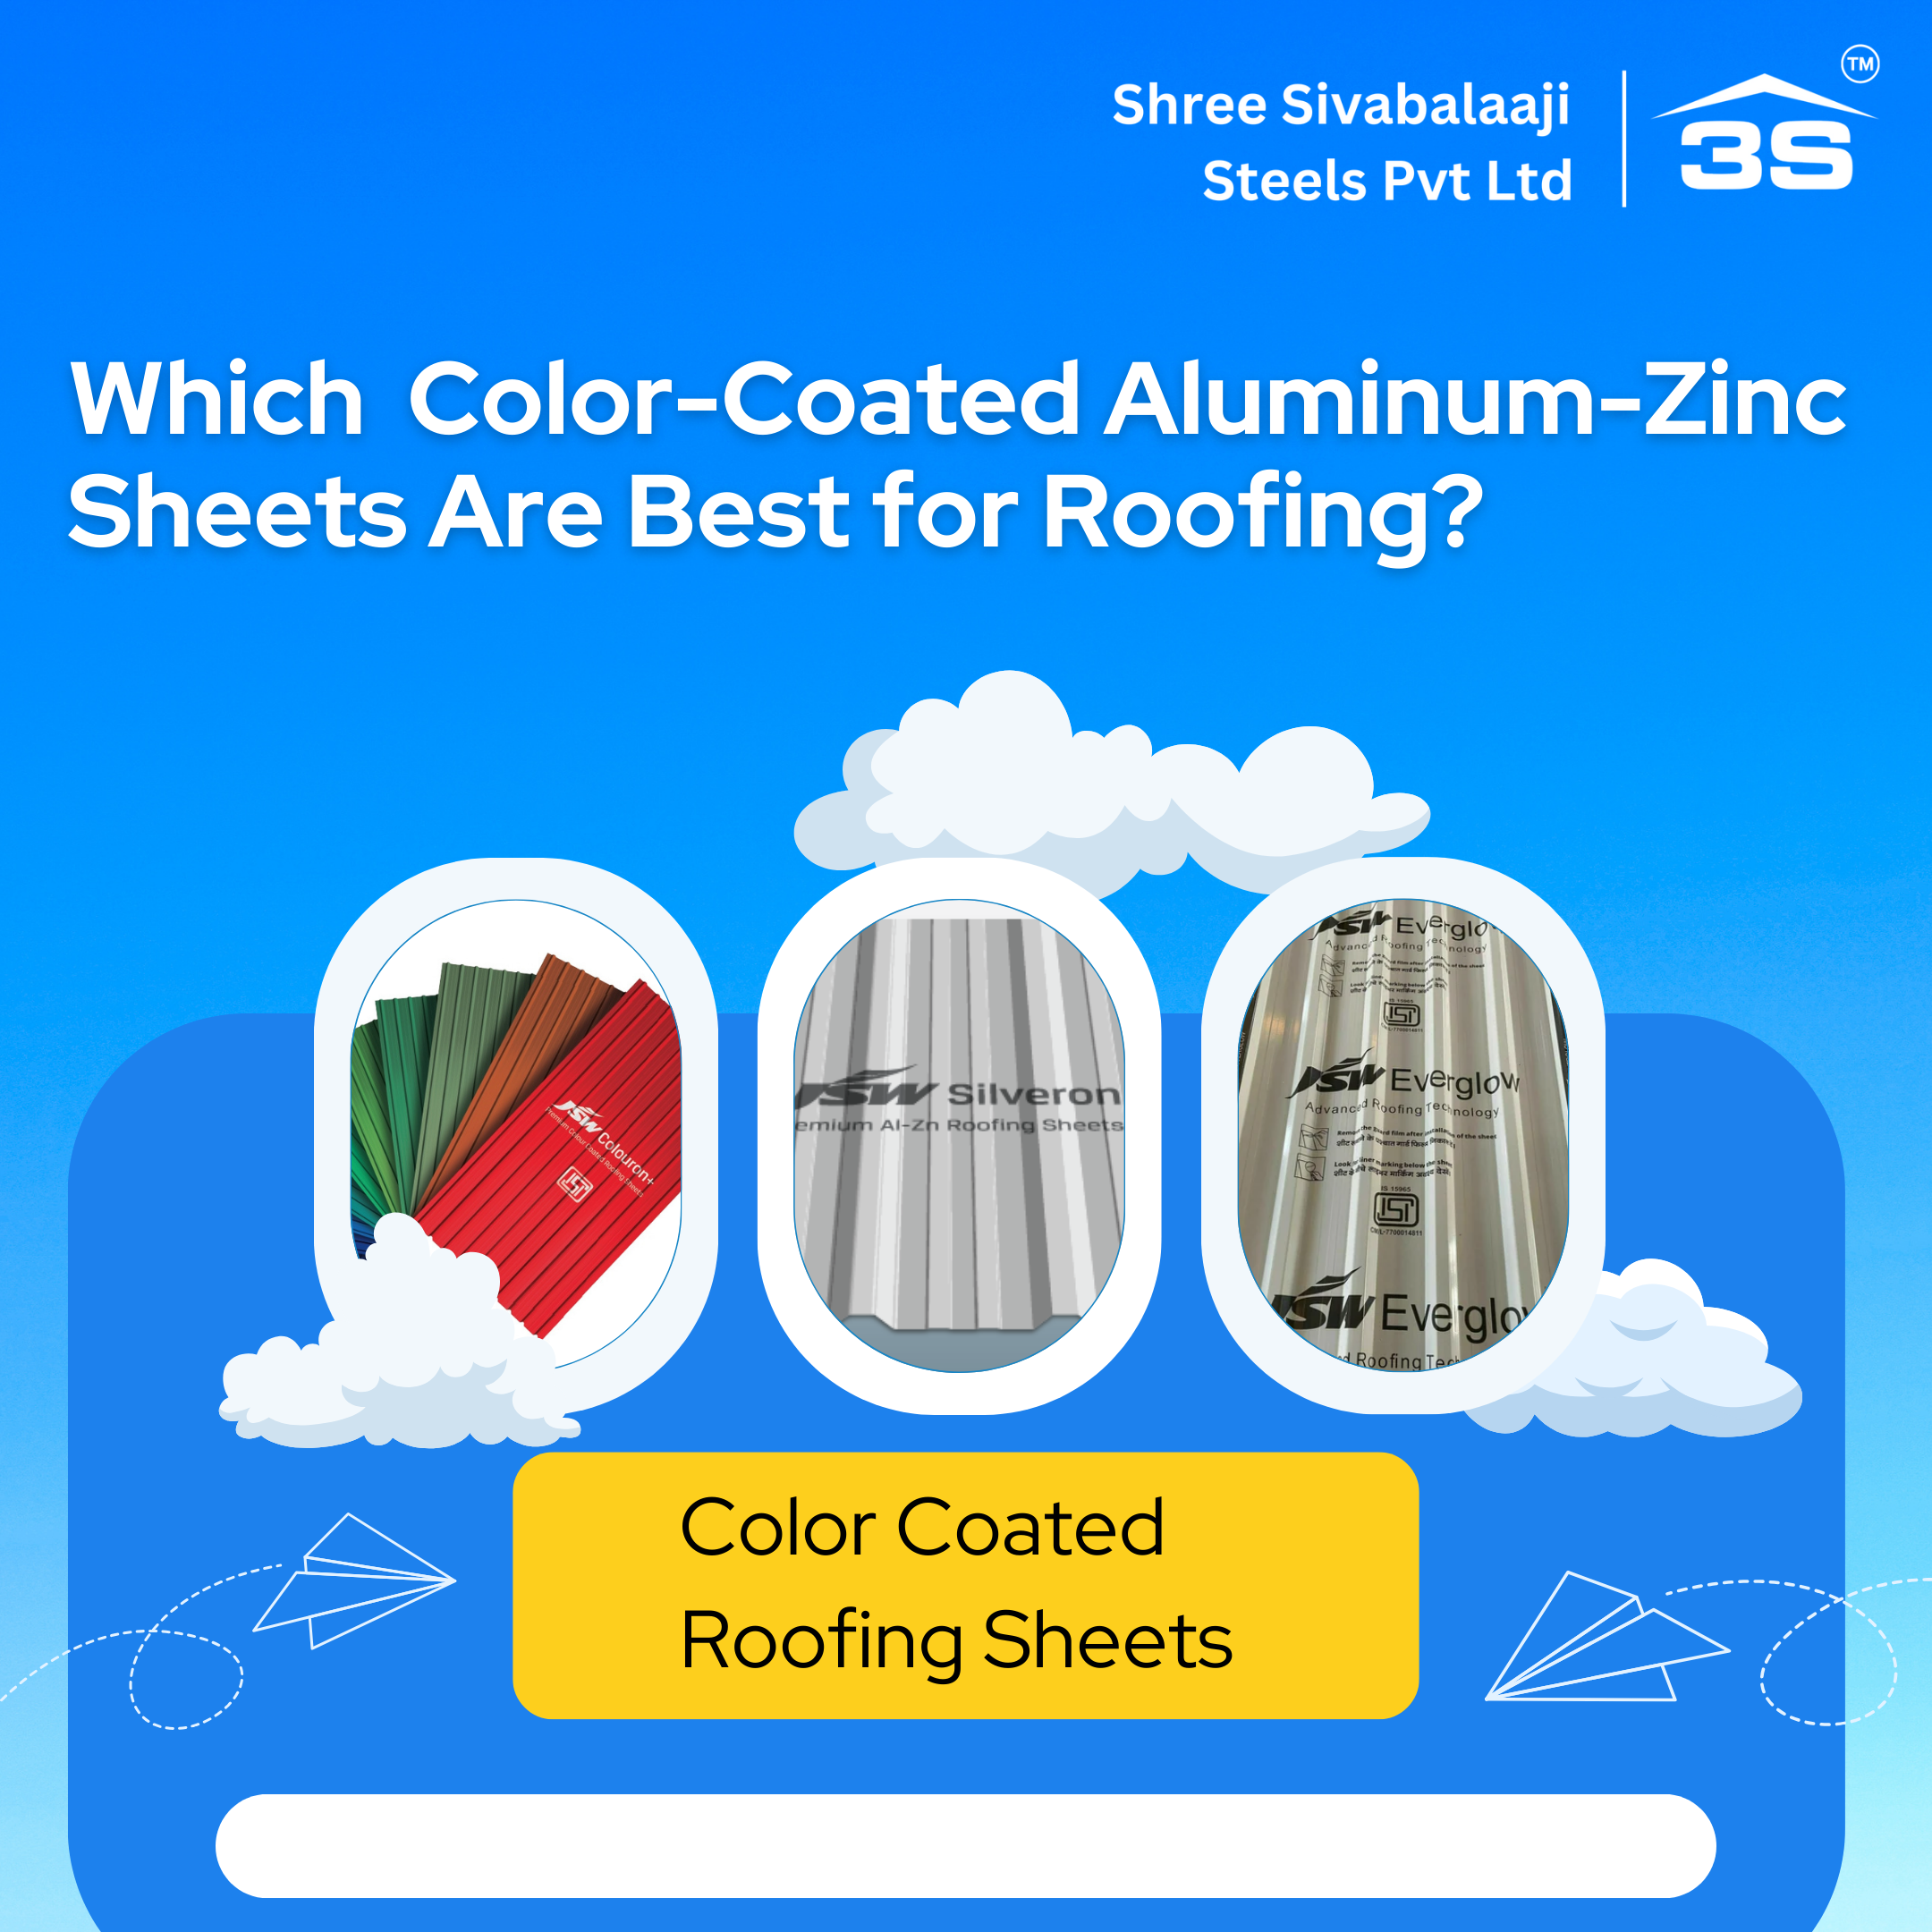 Color-Coated Roofing Sheets